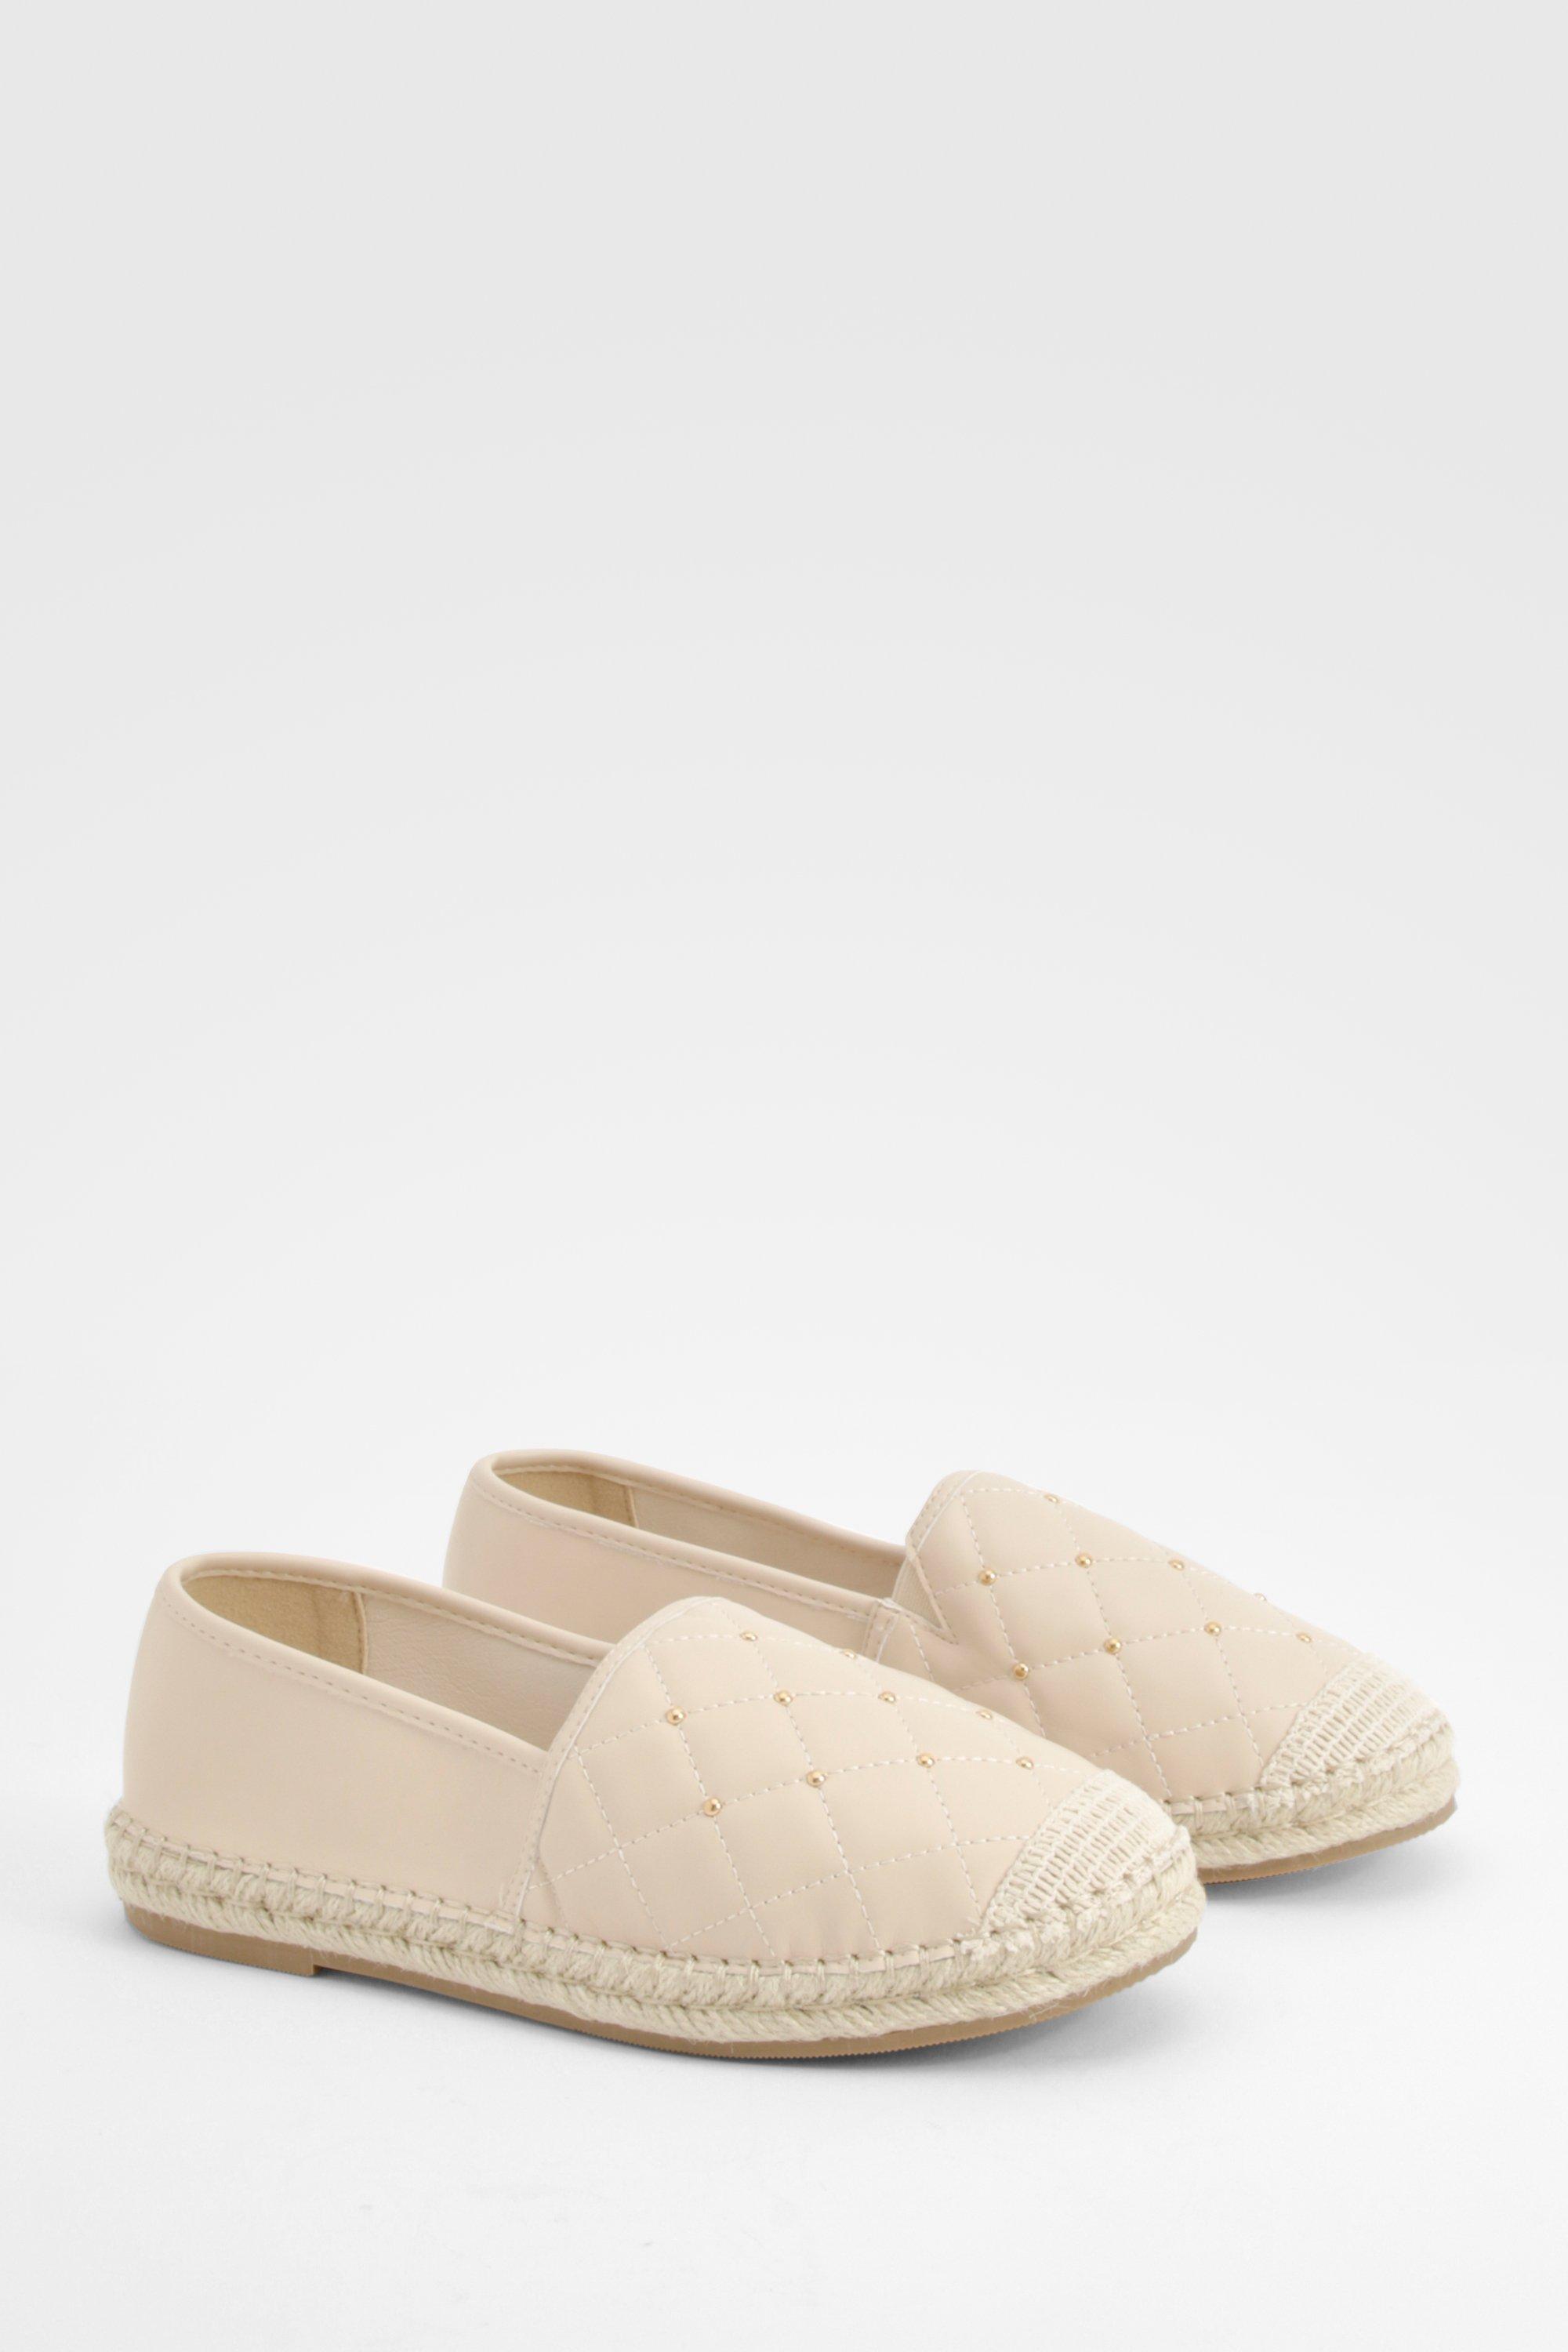 Boohoo Closed Toe Quilted Stud Detail Espadrilles, Nude